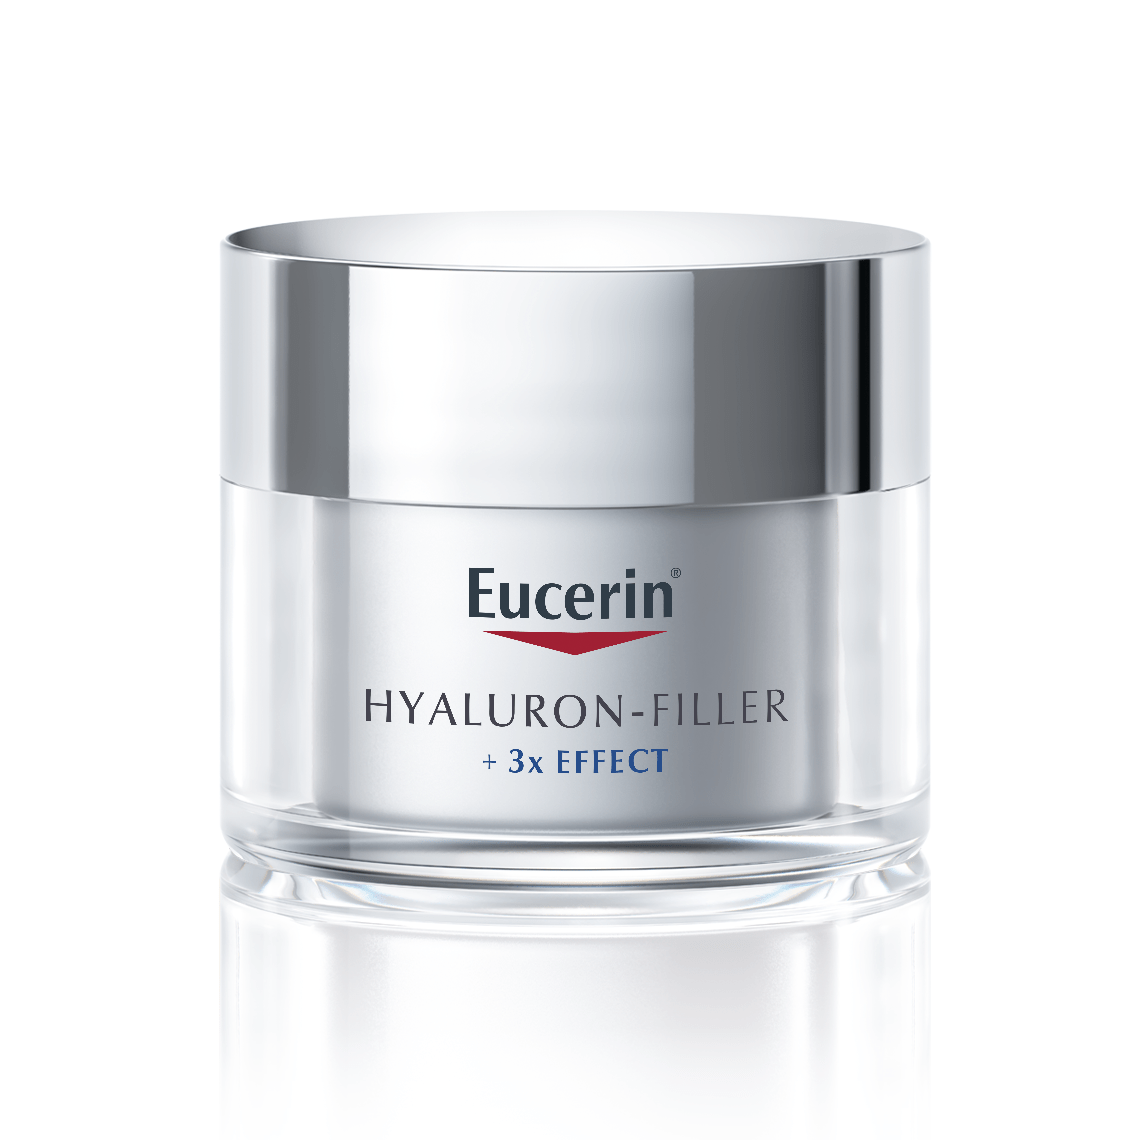 Counteracts aging process. For visibly smoother, radiant, and younger looking skin - Explore now!